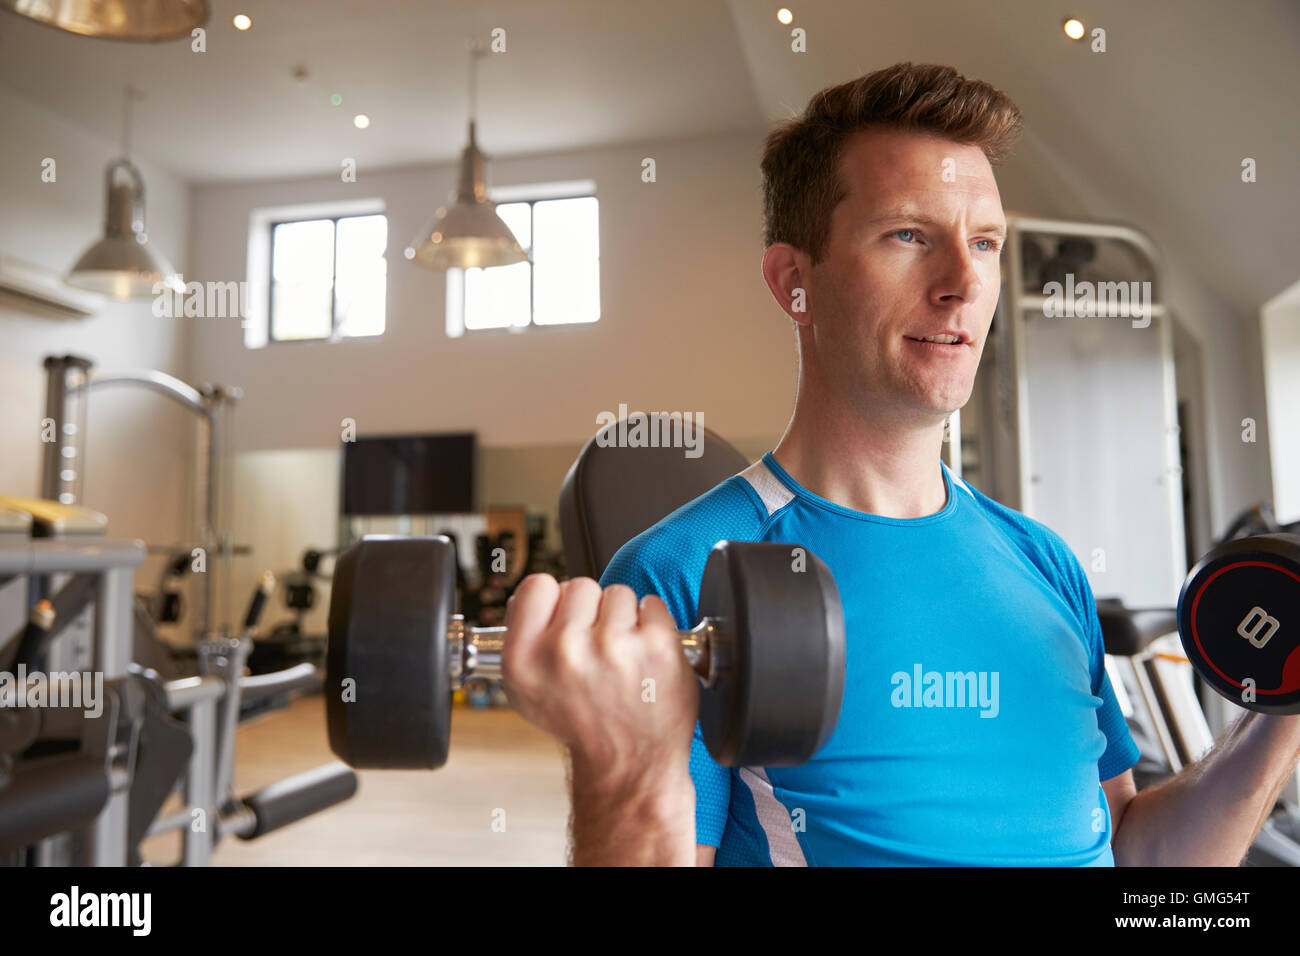 Man practicing bicep curls with dumbbells at a gym, close up Stock Photo